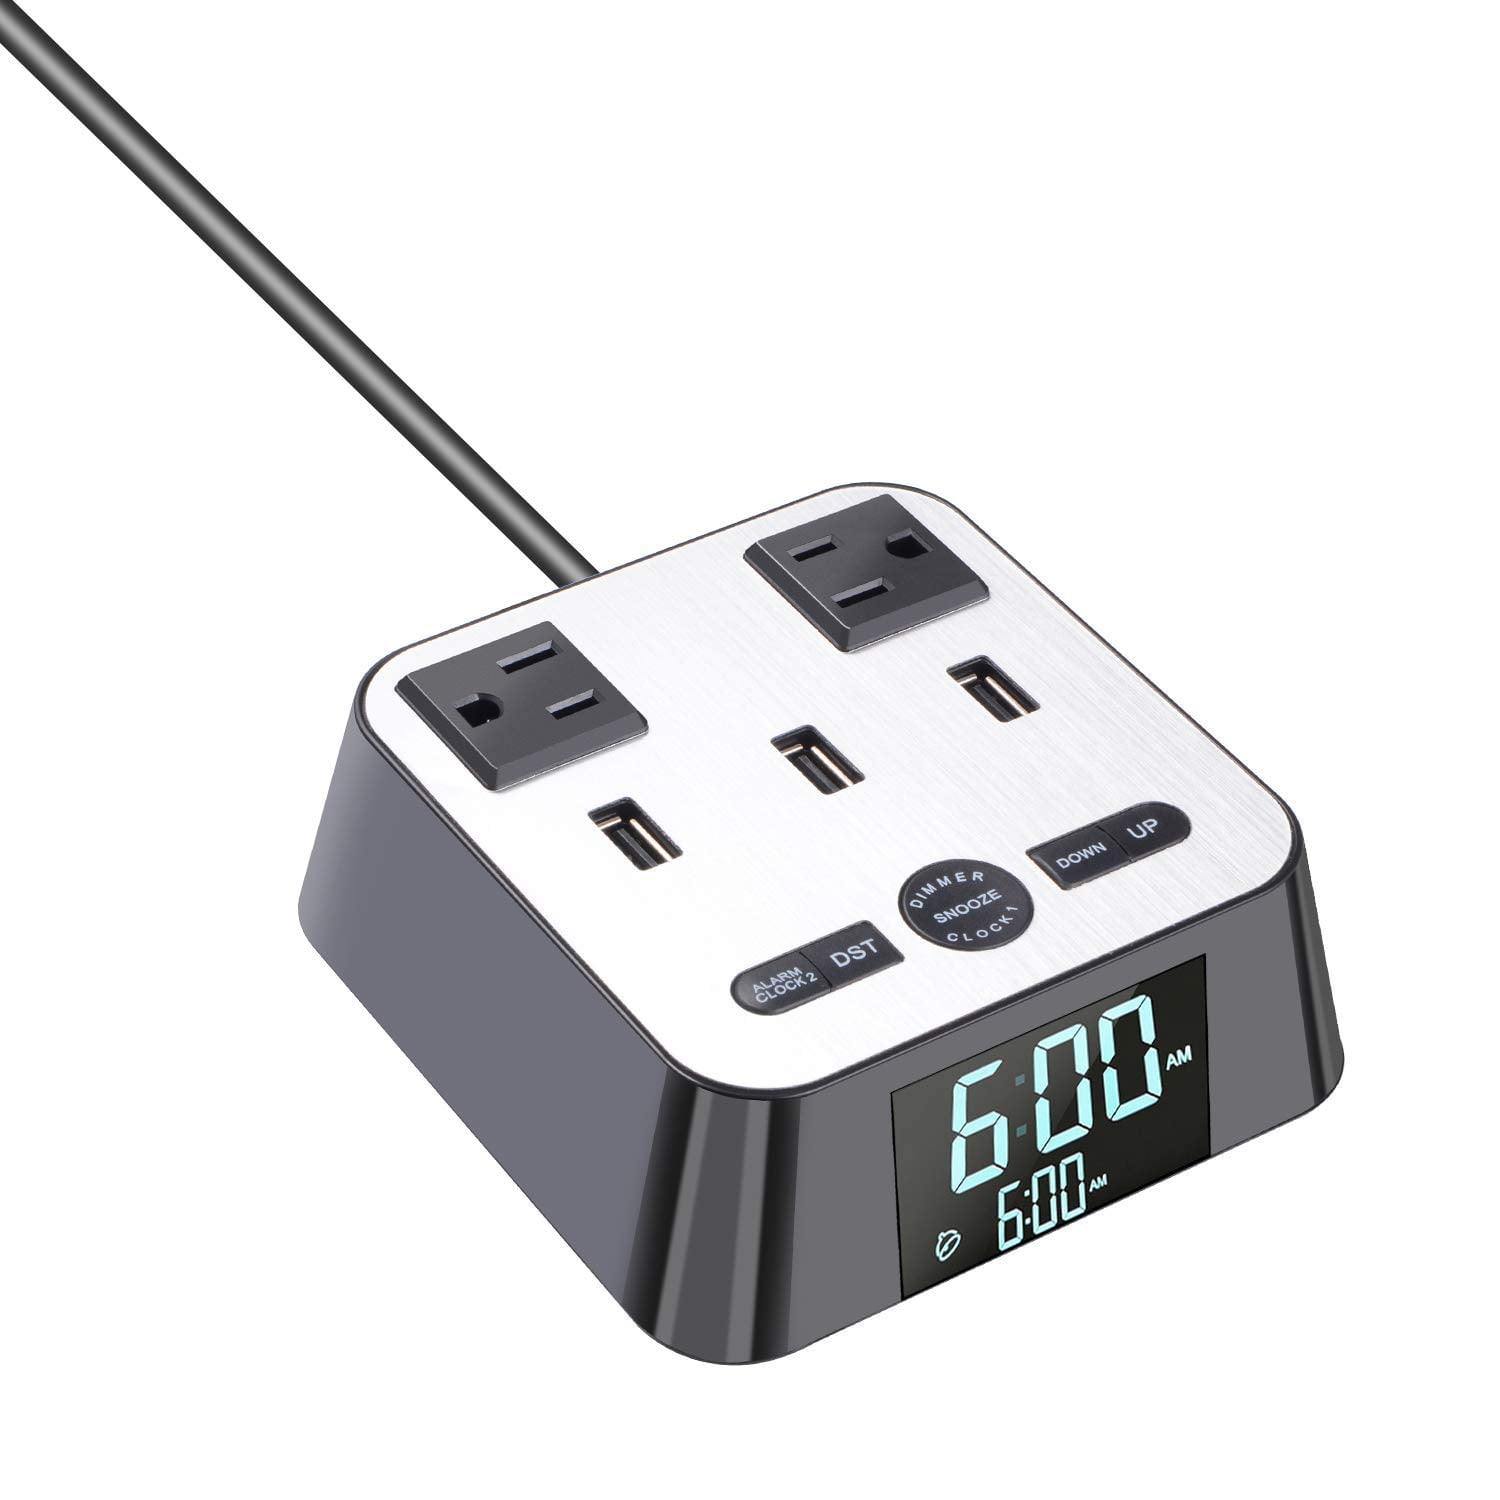 Digital Alarm Clock For Bedroom Charger W 3 Usb Ports And 2